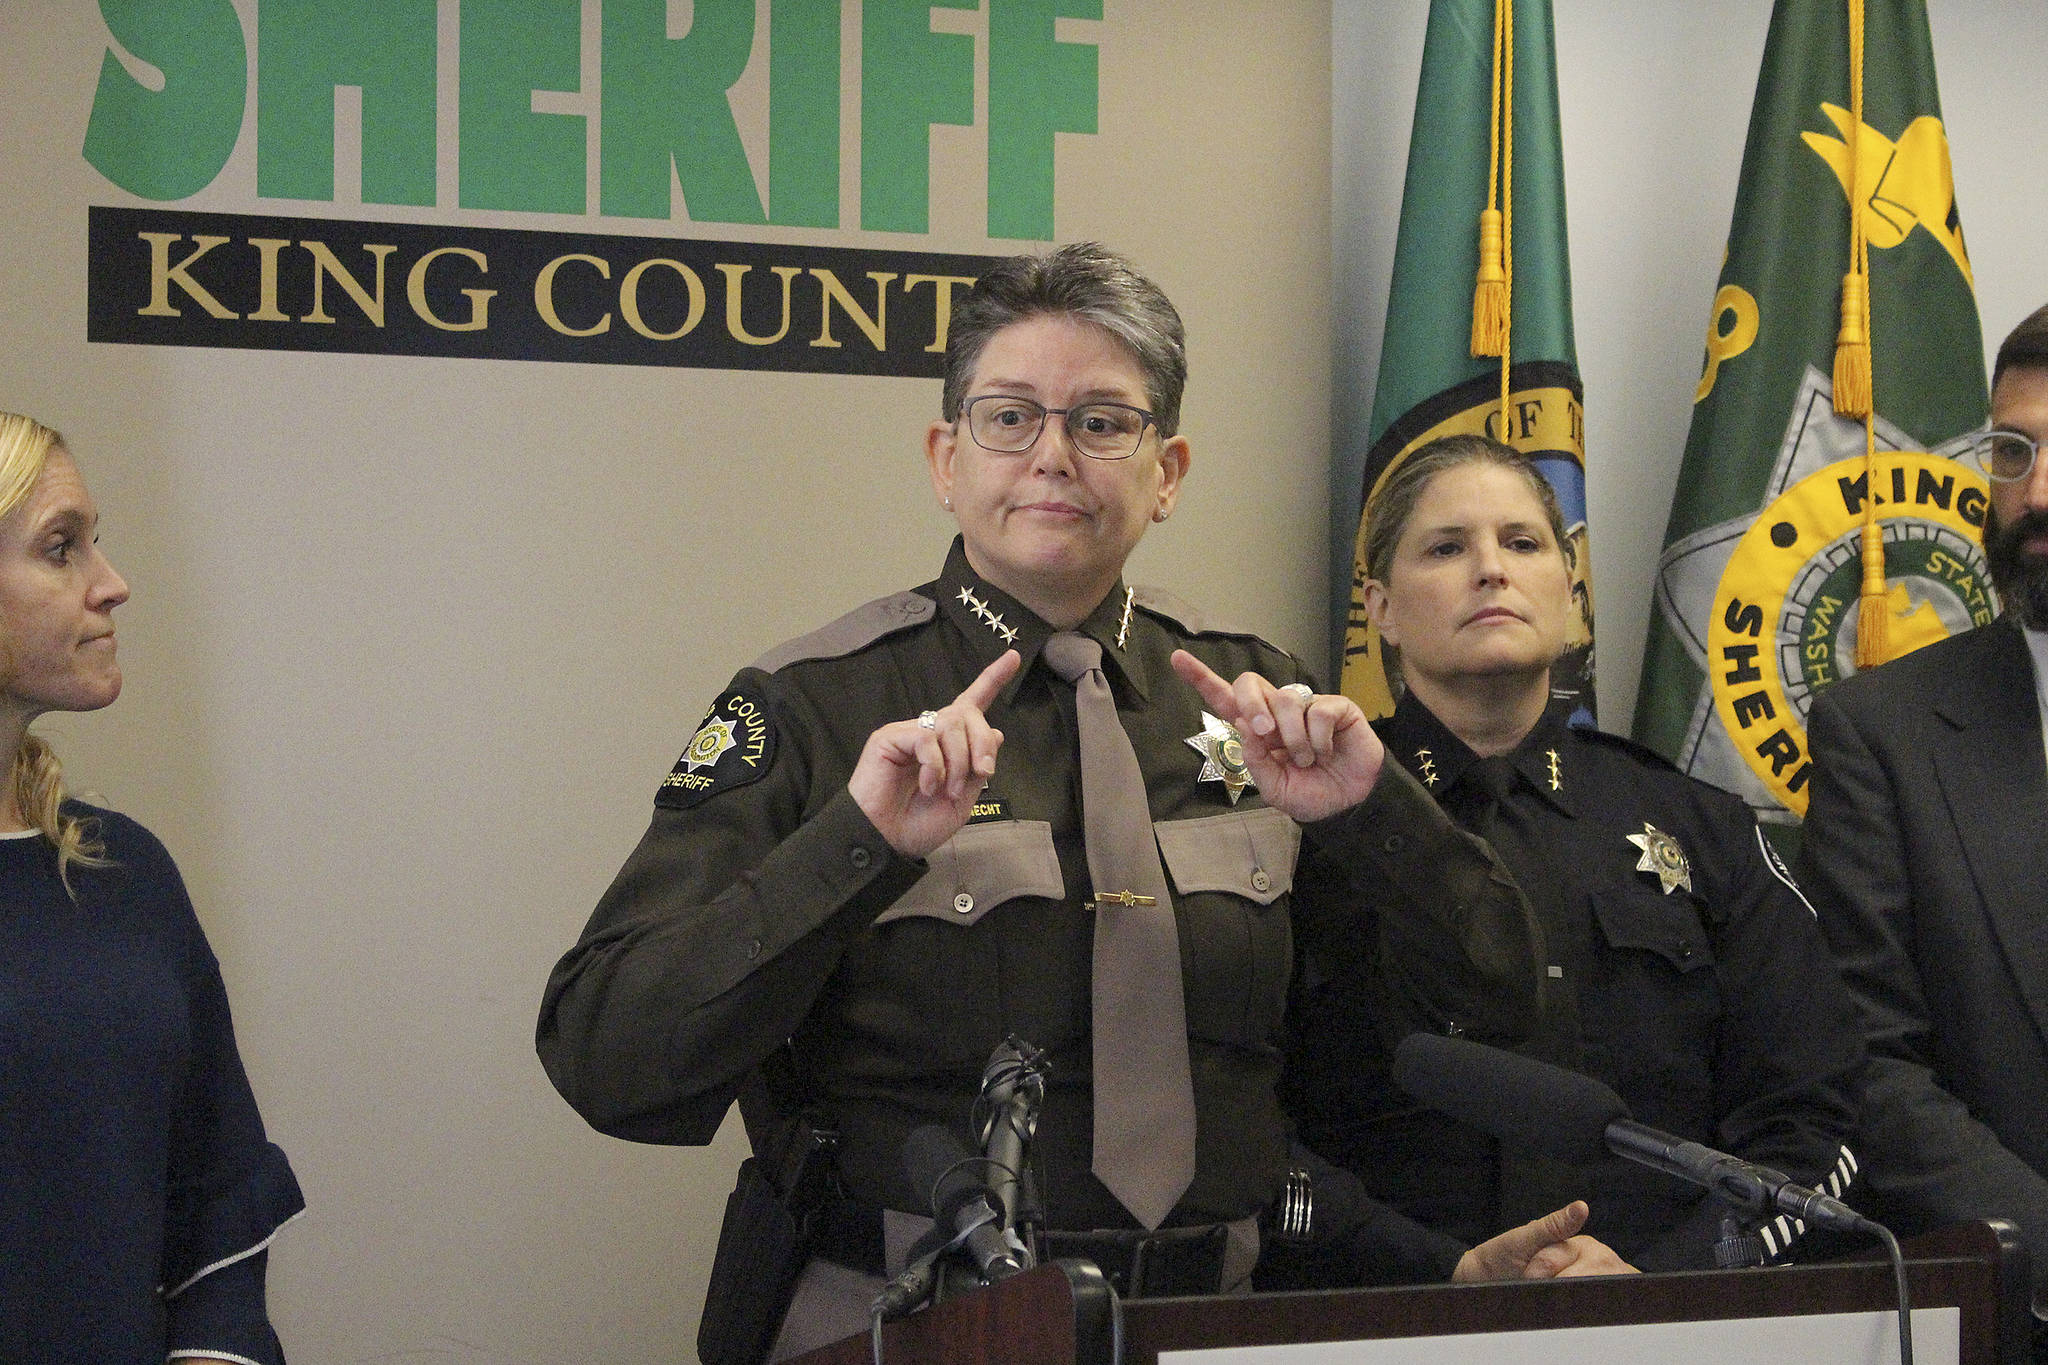 Elected or appointed? King County weighs sheriff options